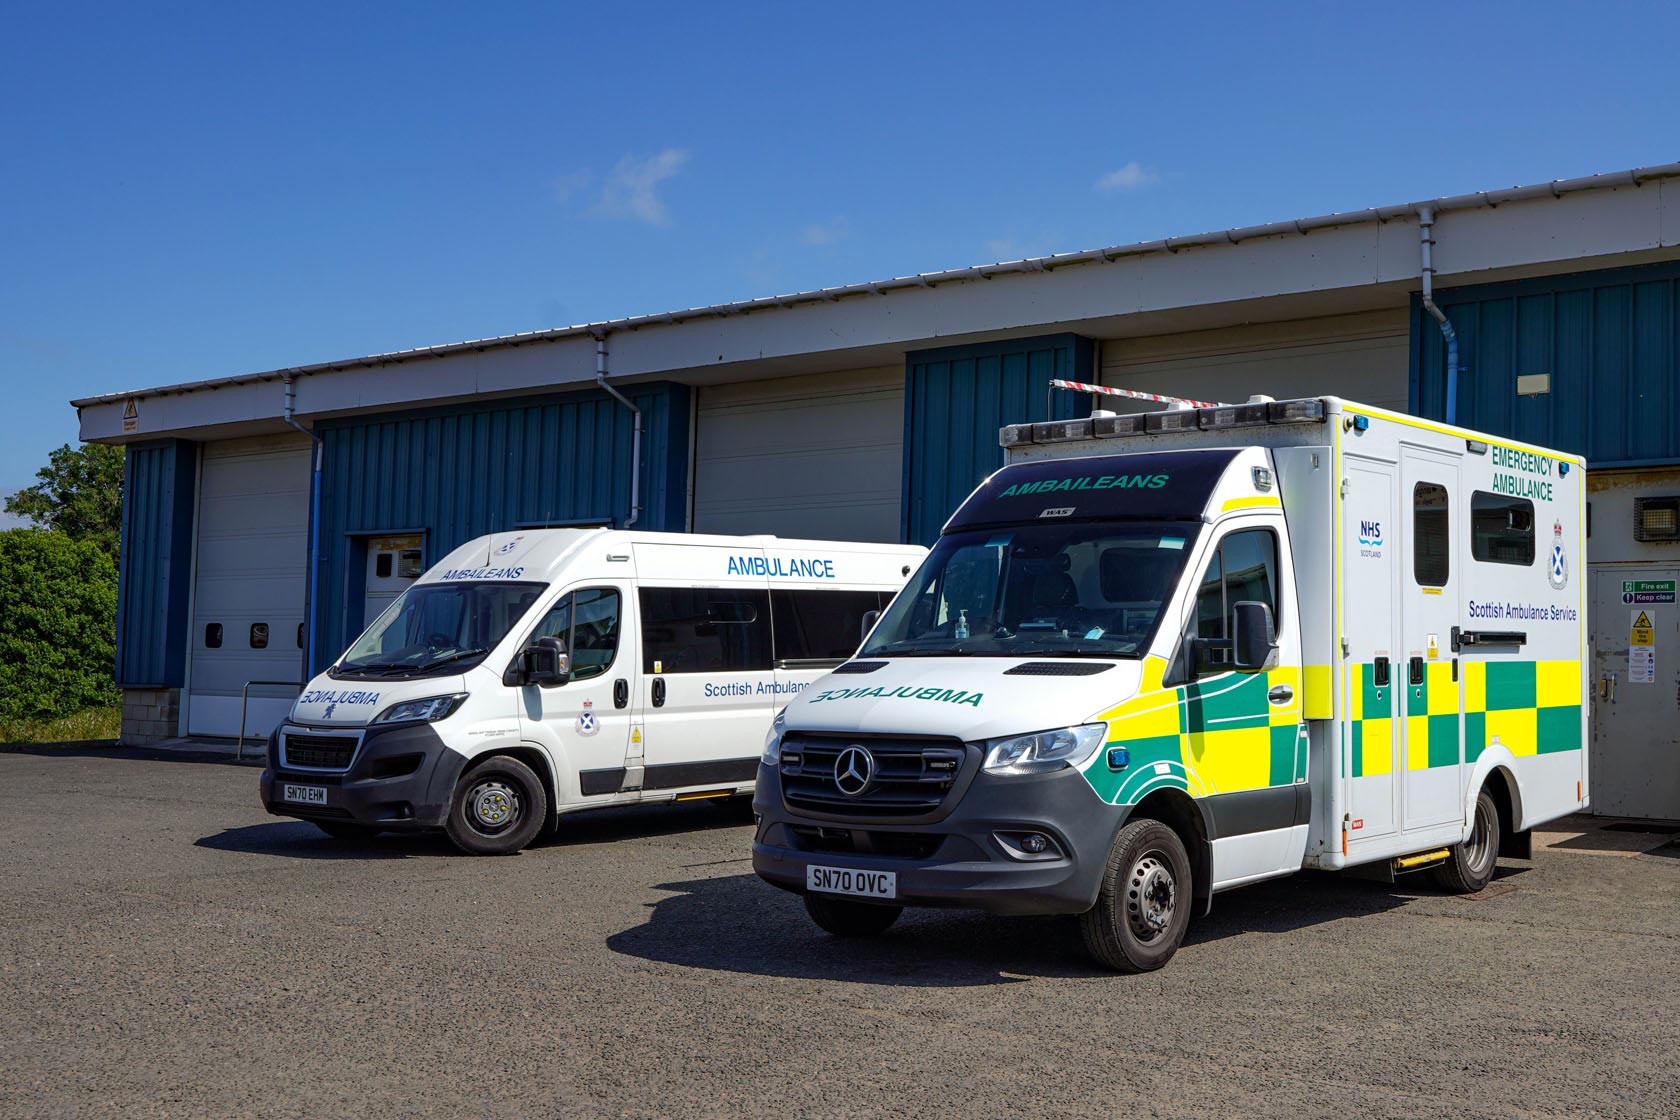 St. Andrew's Ambulance Association operates from a local base